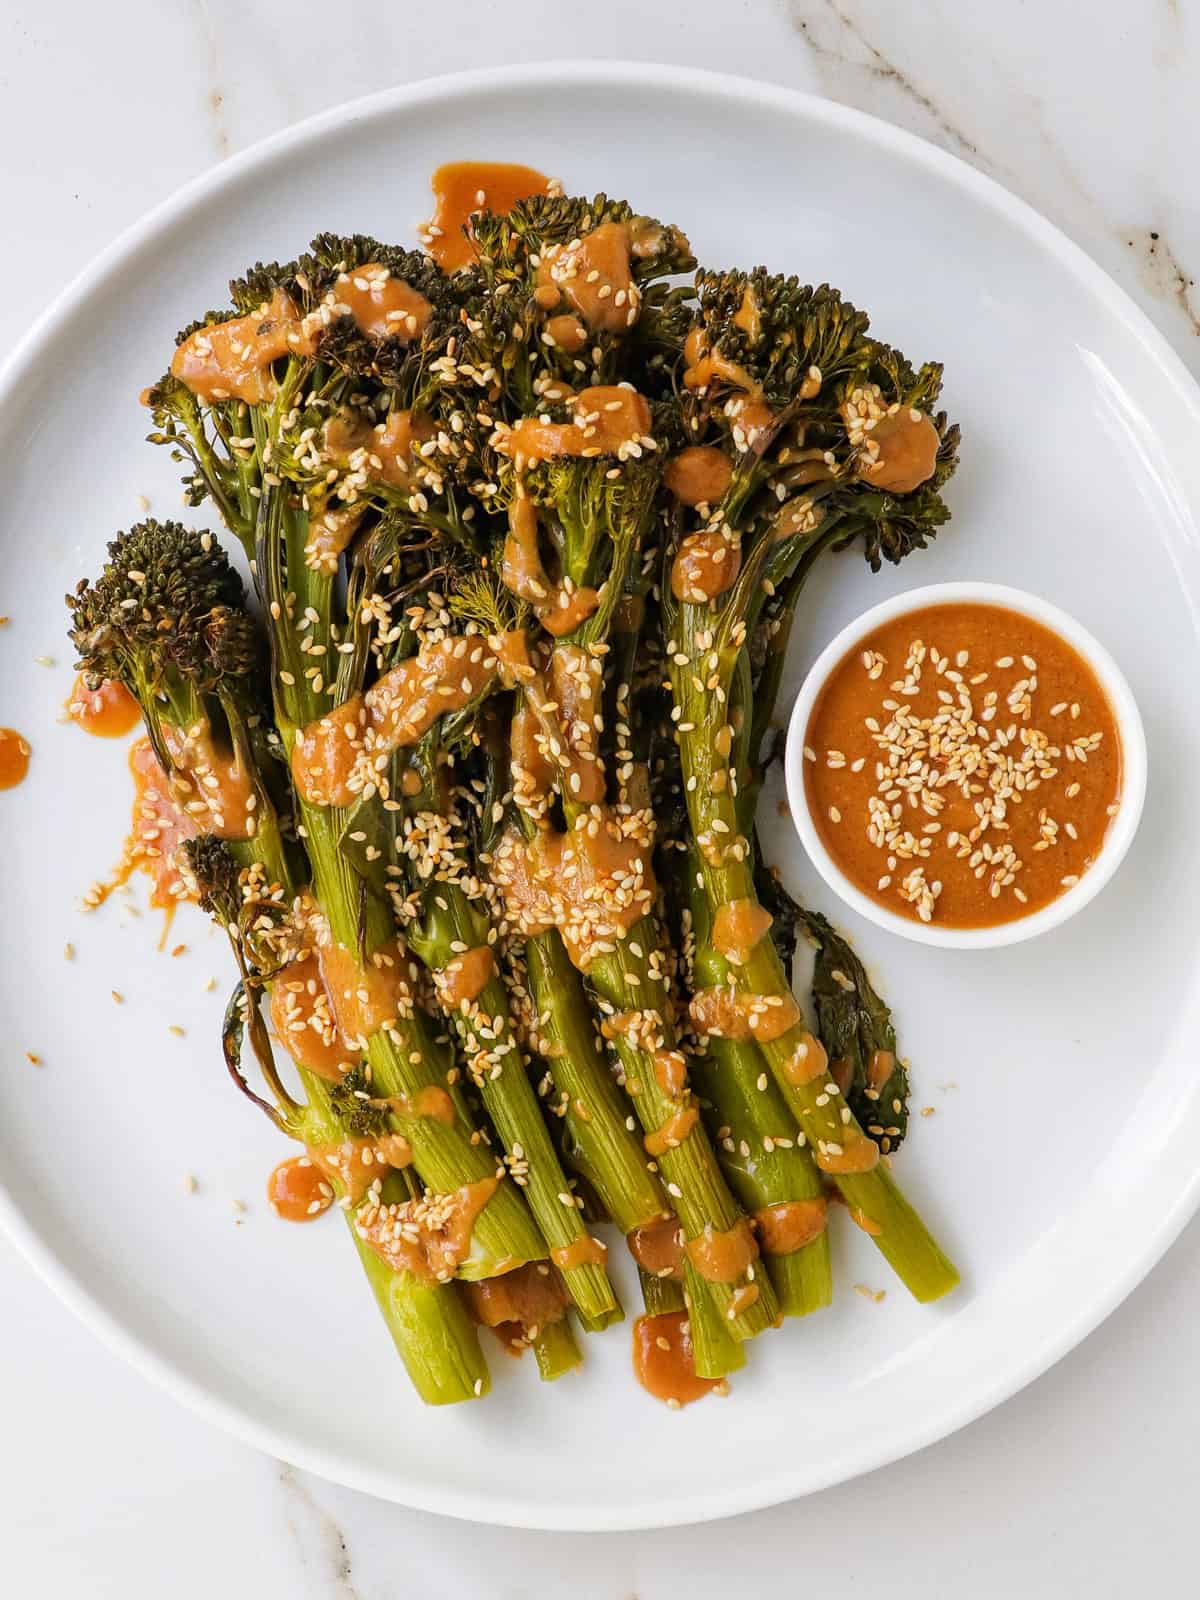 Tenderstem broccoli on a plate with miso sauce drizzled on top.